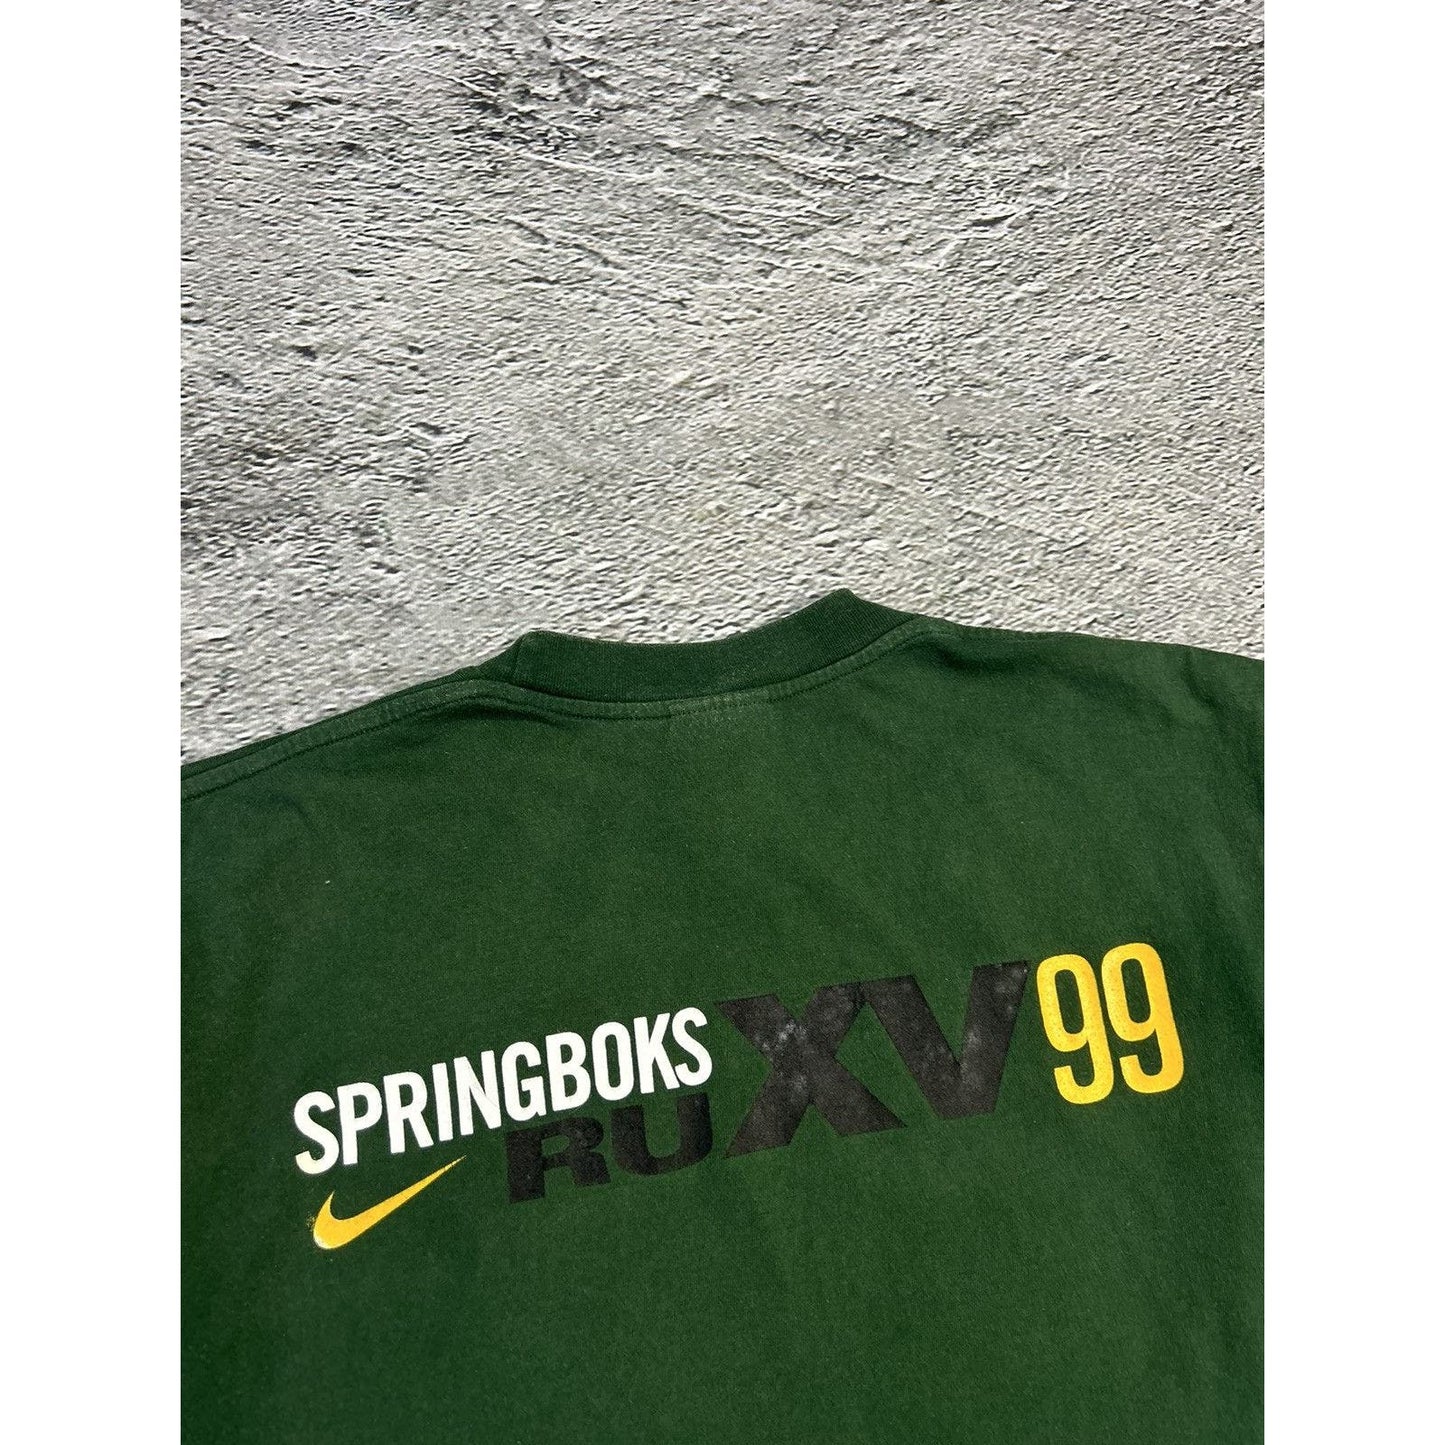 Nike vintage T-shirt 90s green central swoosh sa rugby